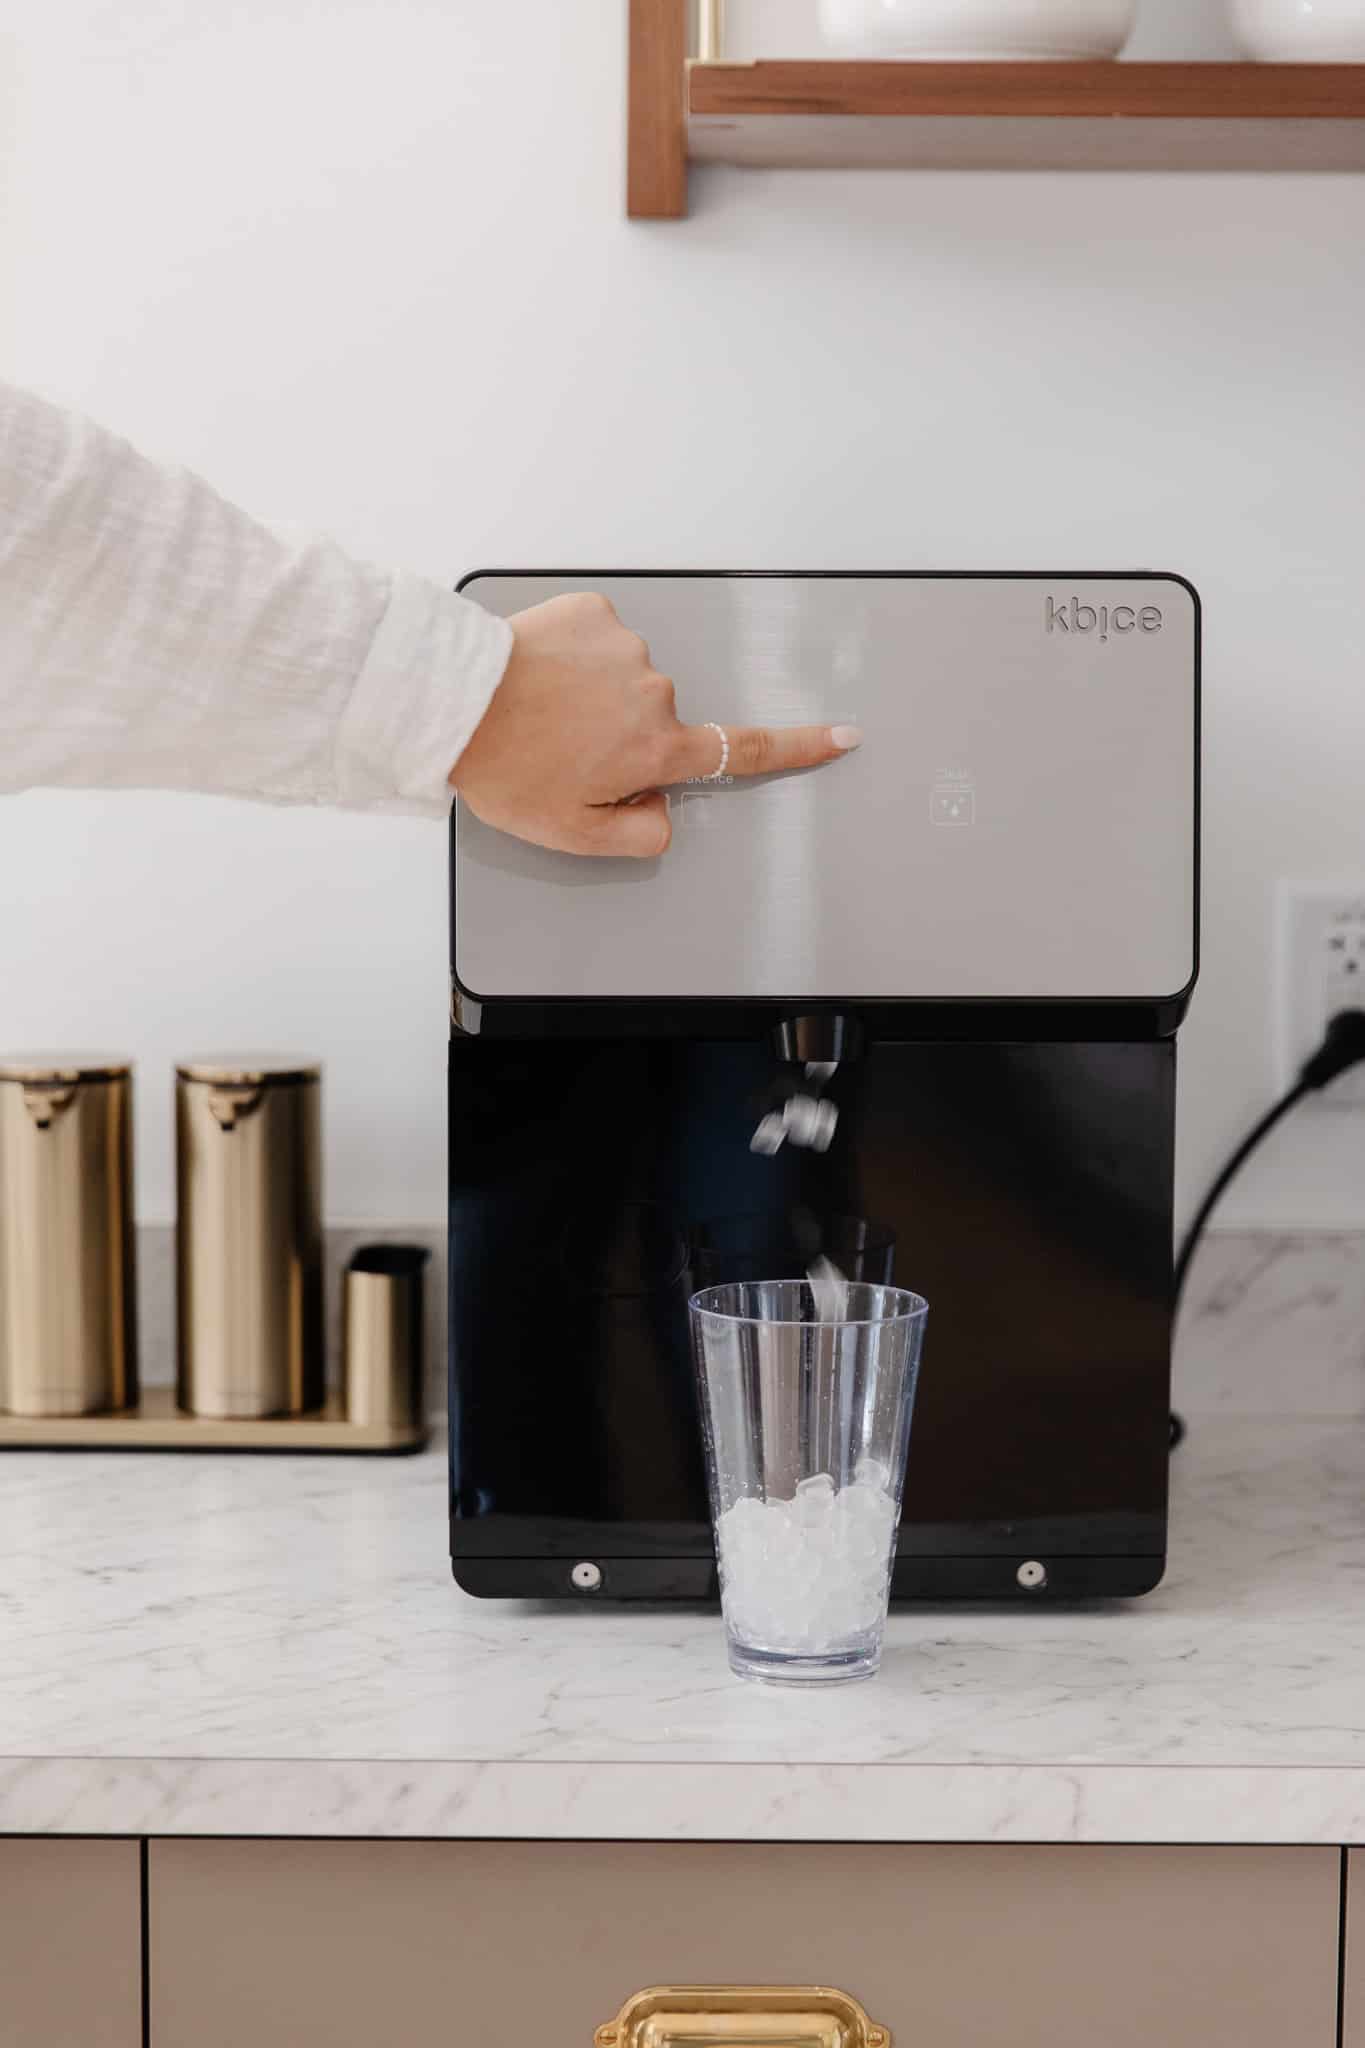 BEST ICE EVER🧊 Yes, this  nugget ice maker is life changing and, nugget ice maker